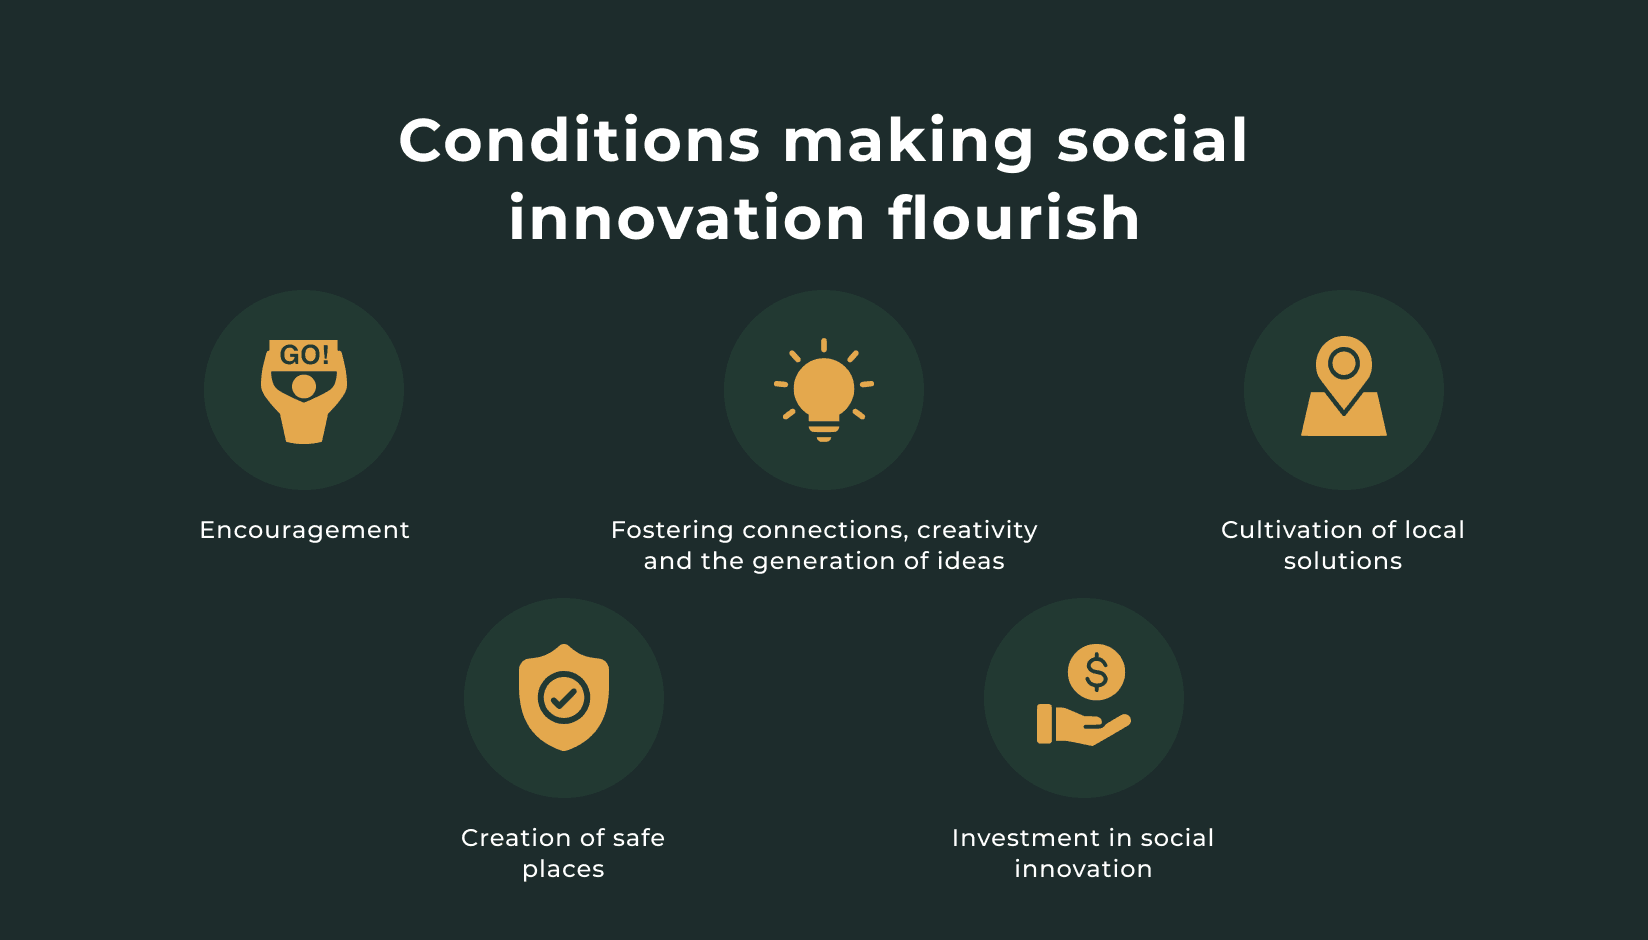 Conditions making social innovation flourish - infographic